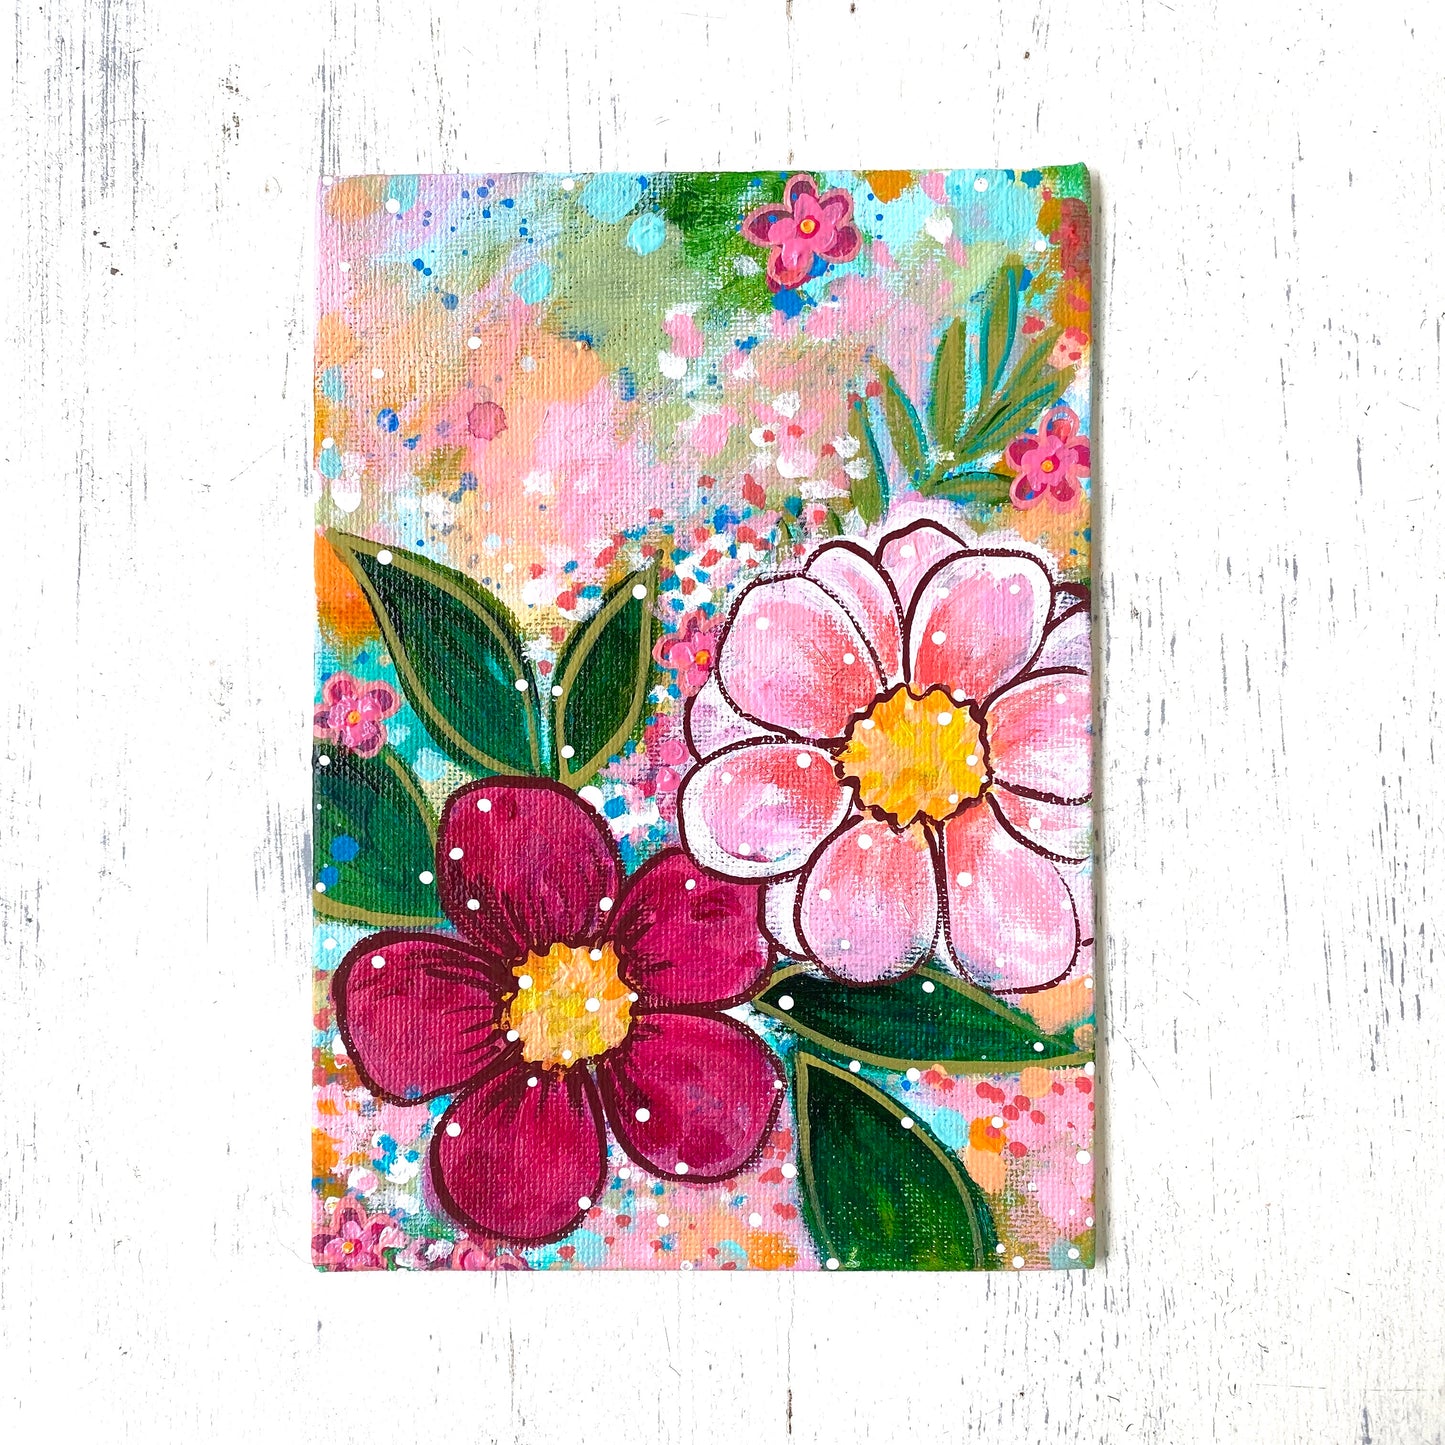 January Daily Painting Day 26 “Floral Oasis” 5x7 inch Floral Original - Bethany Joy Art